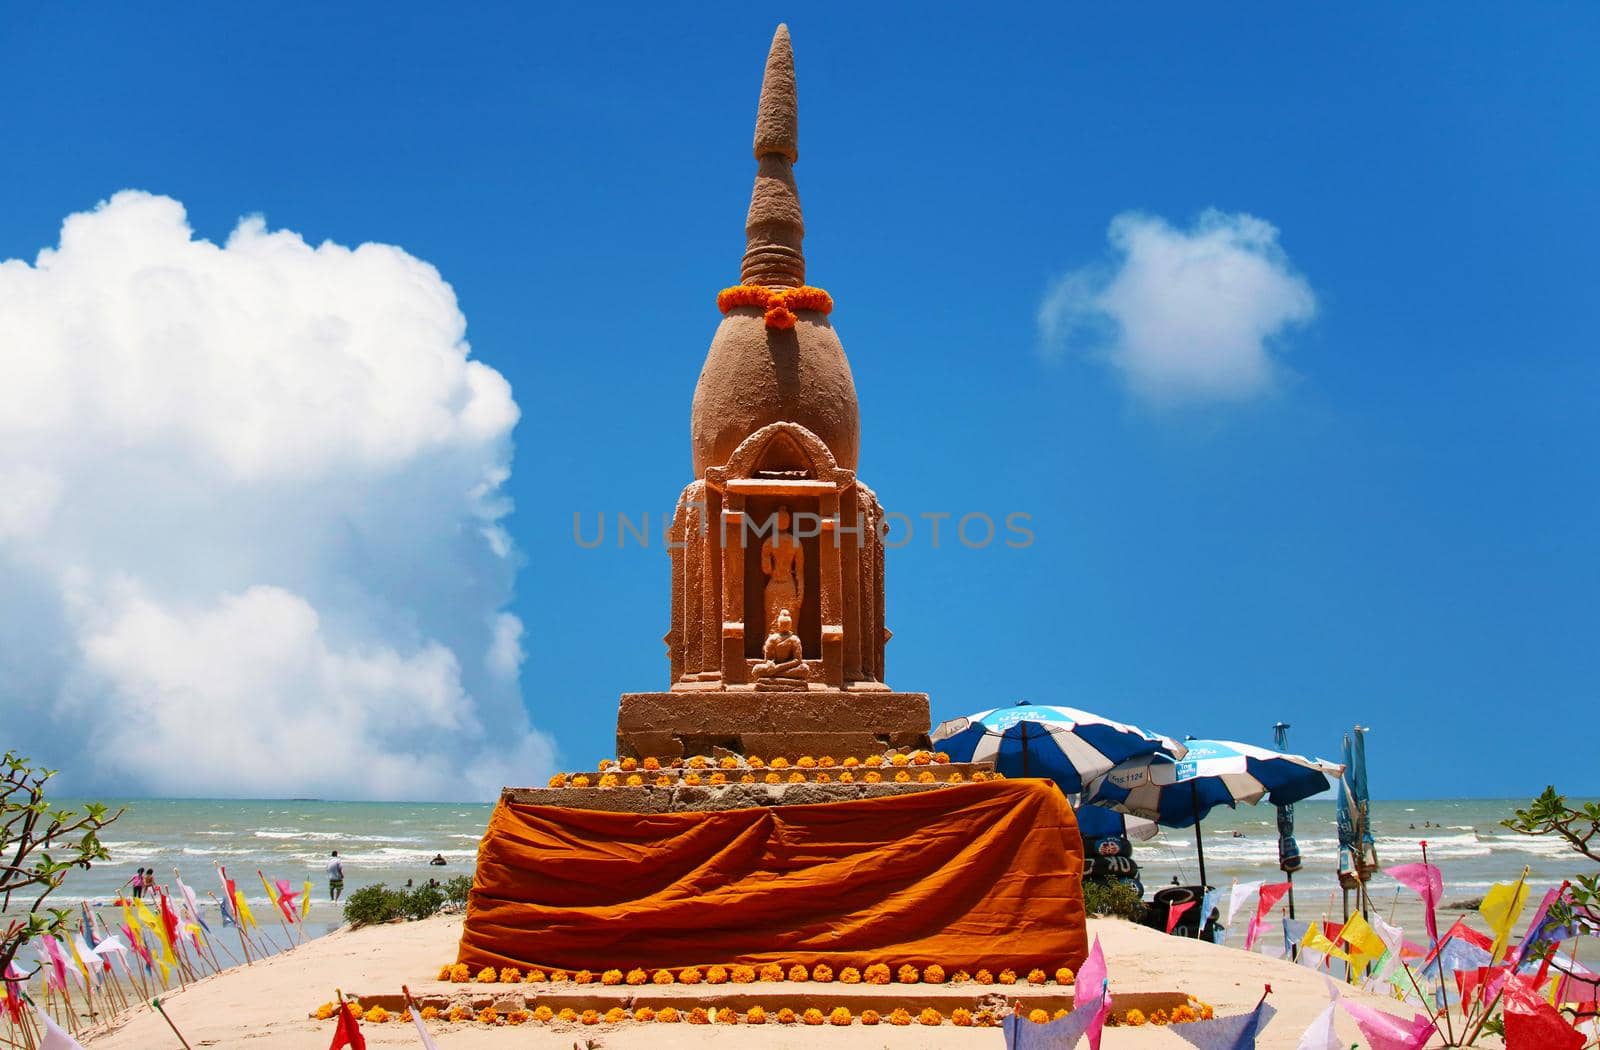 Lord buddha stand style sand pagoda was carefully built, and beautifully decorated in Songkran festival by Darkfox